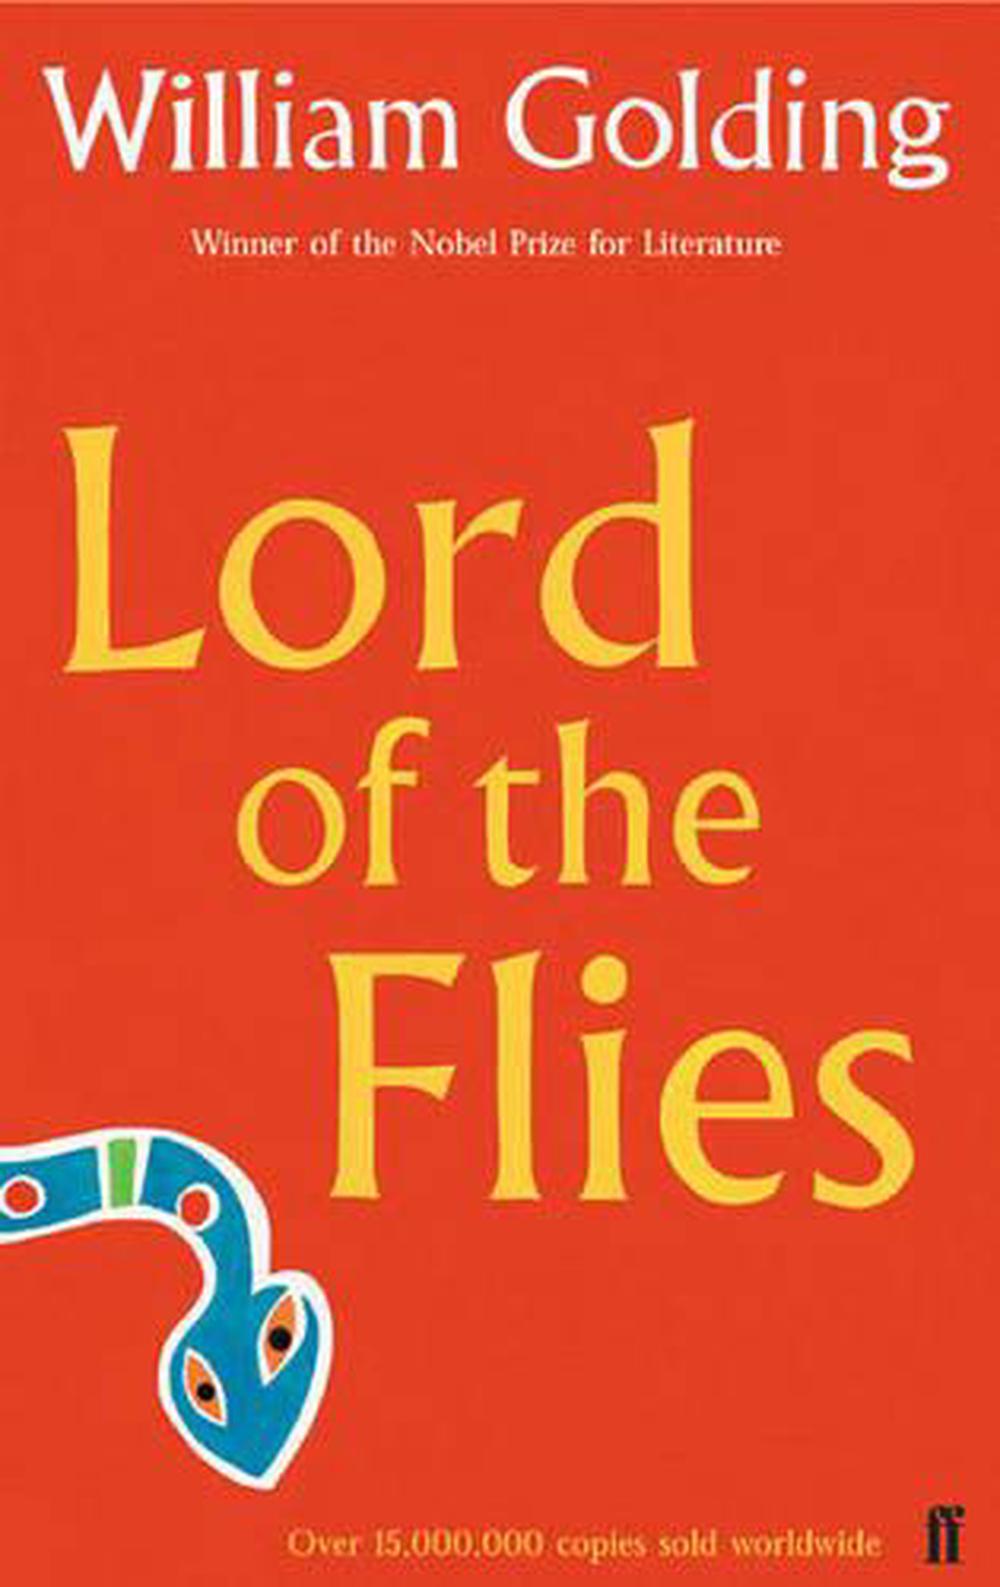 book review on lord of the flies